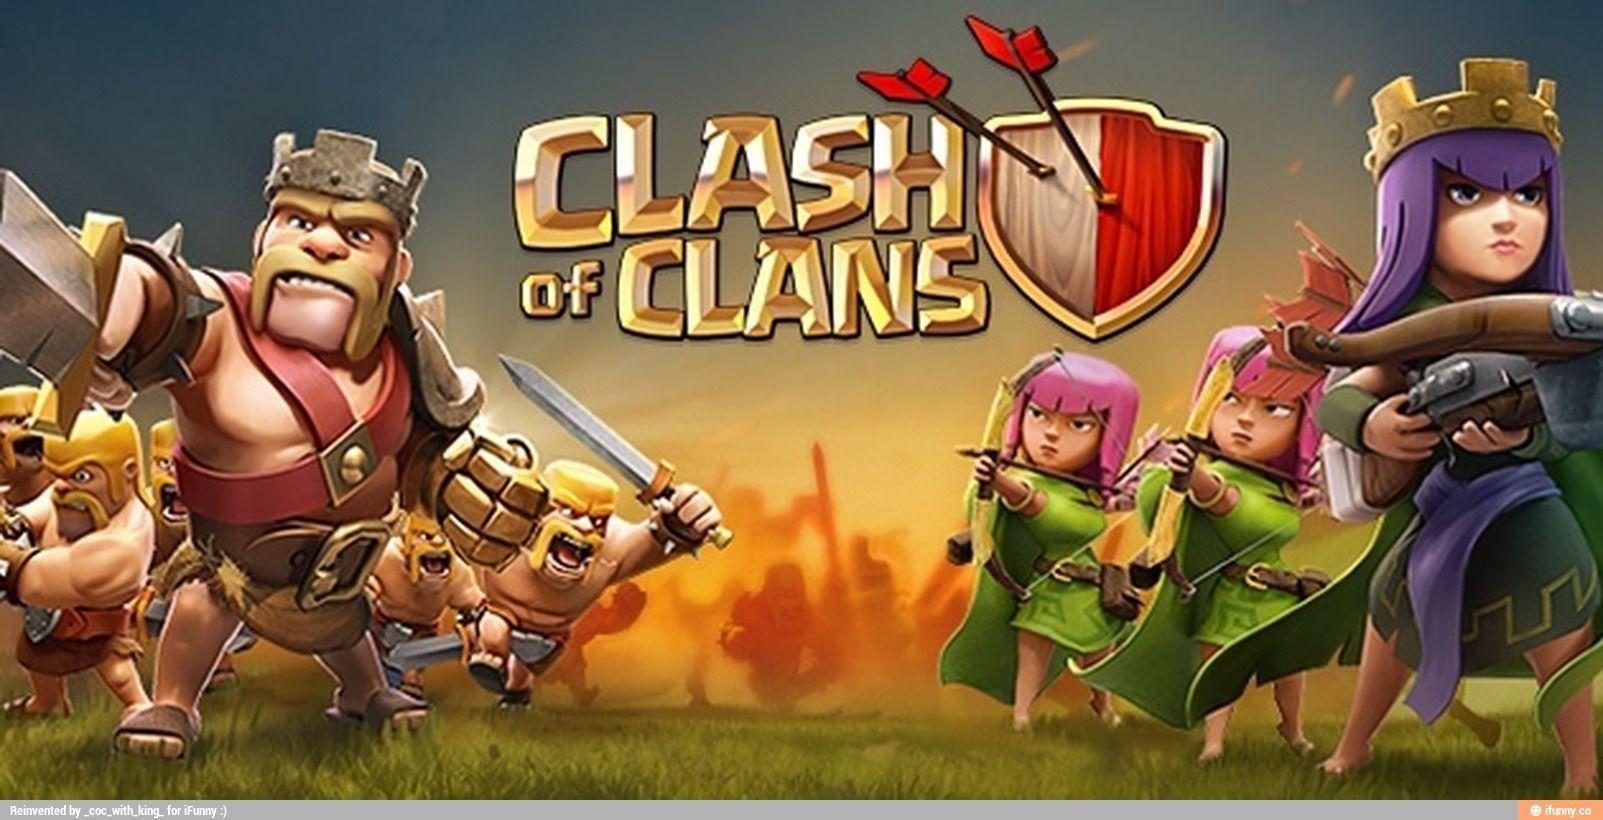 10 Clash of Clans Wallpapers for Clashers  Clash for Dummies